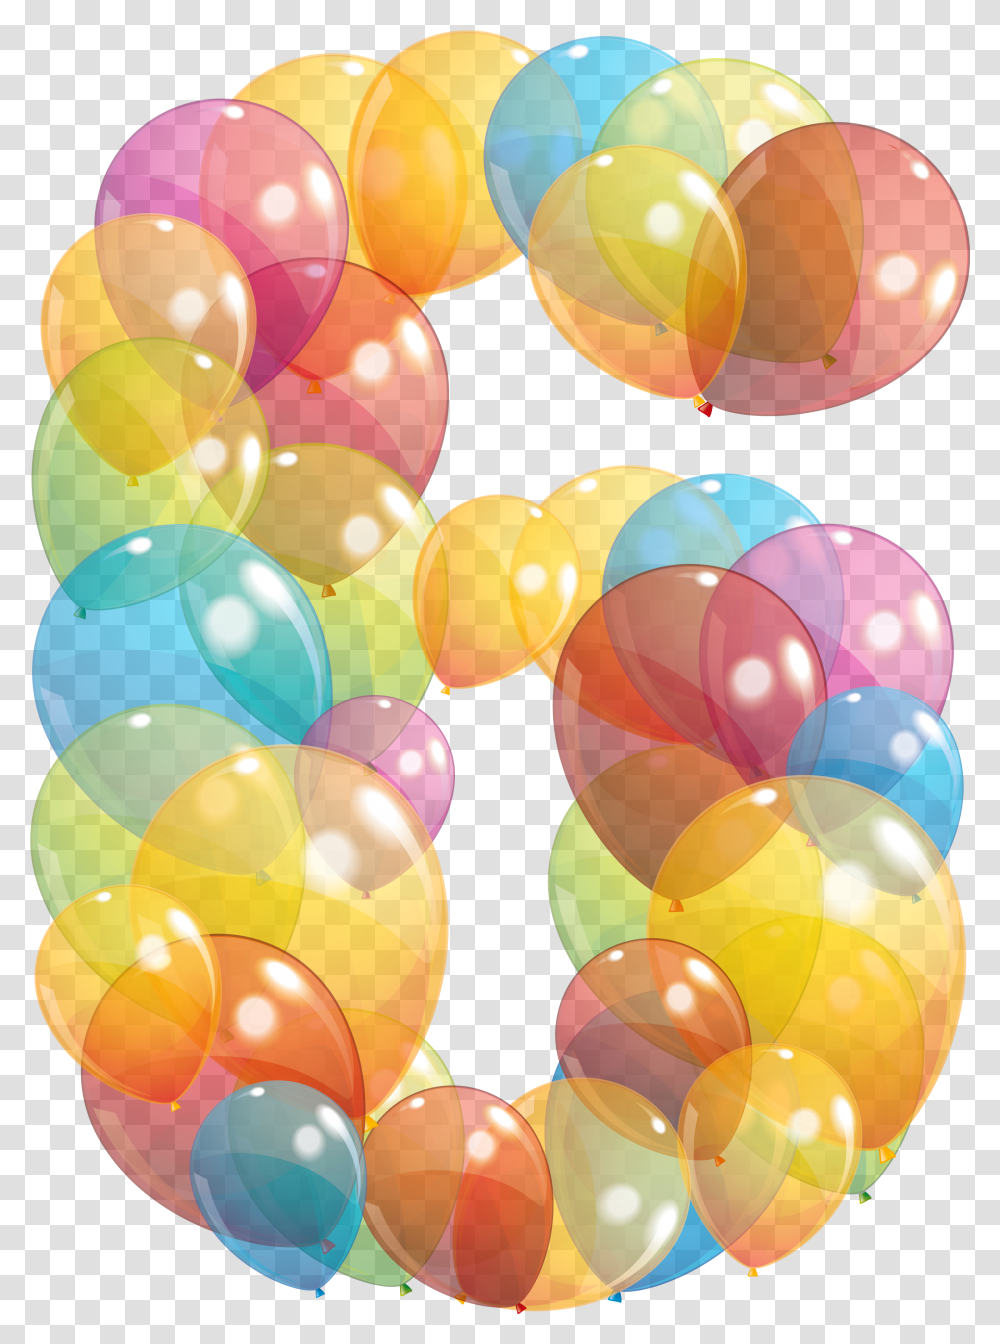 Real Balloons Background Balloons Transparent Png